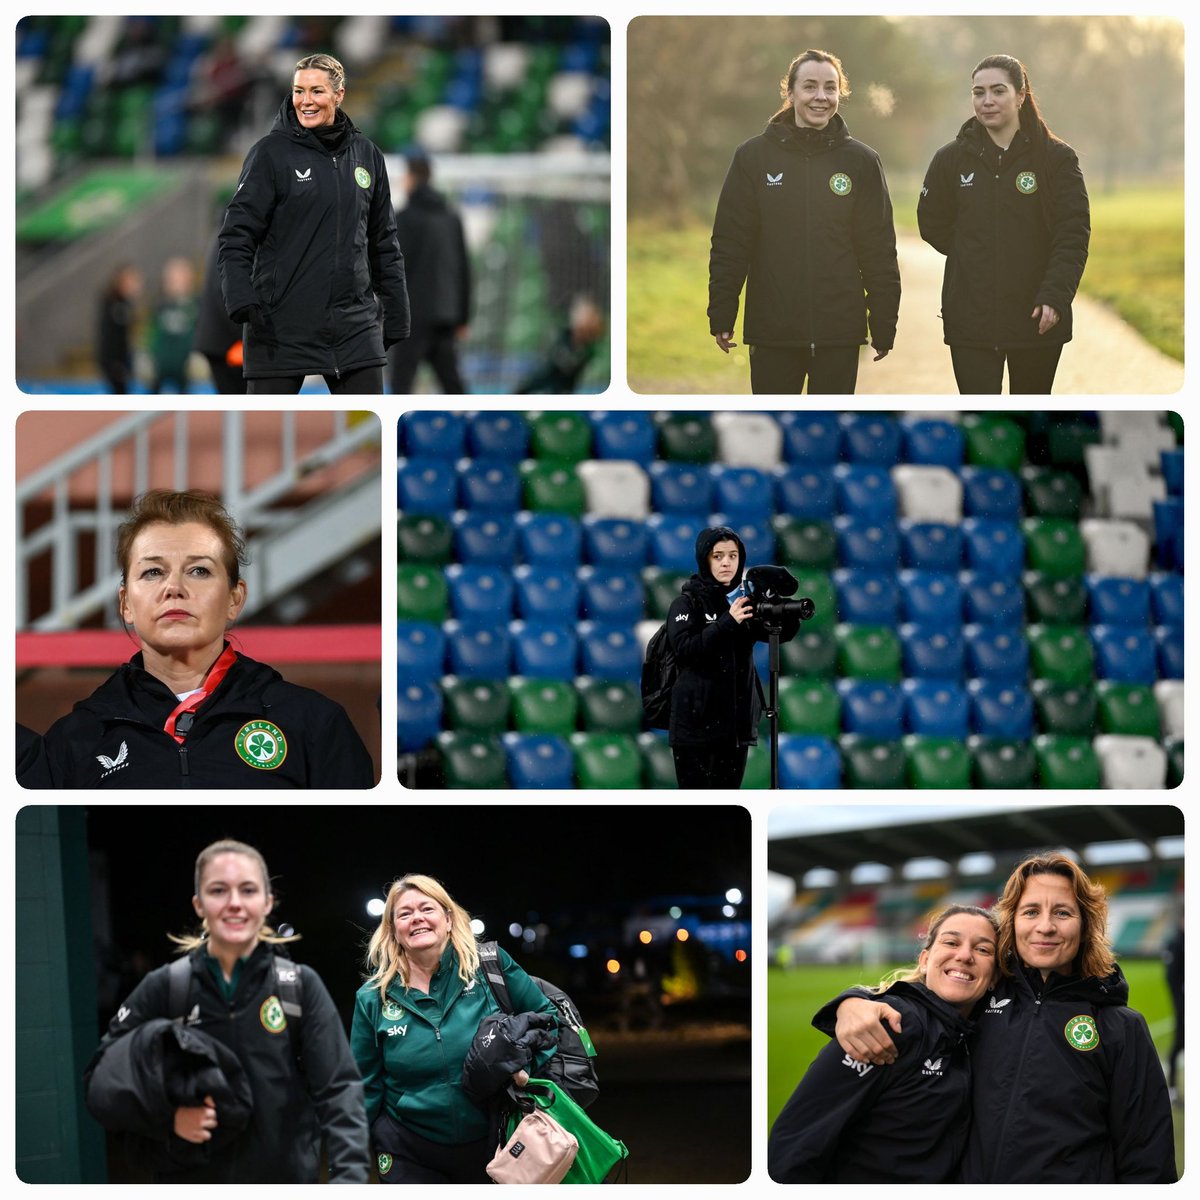 To all the strong, smart, and wonderful women that work tirelessly behind the scenes to make us better, thank you 💚 #HappyInternationalWomensDay @IrelandFootball @ivicasagrande @AngieOMara7 @Sarahsportpsych @caraFG @emmaclinton_ @emmsb30